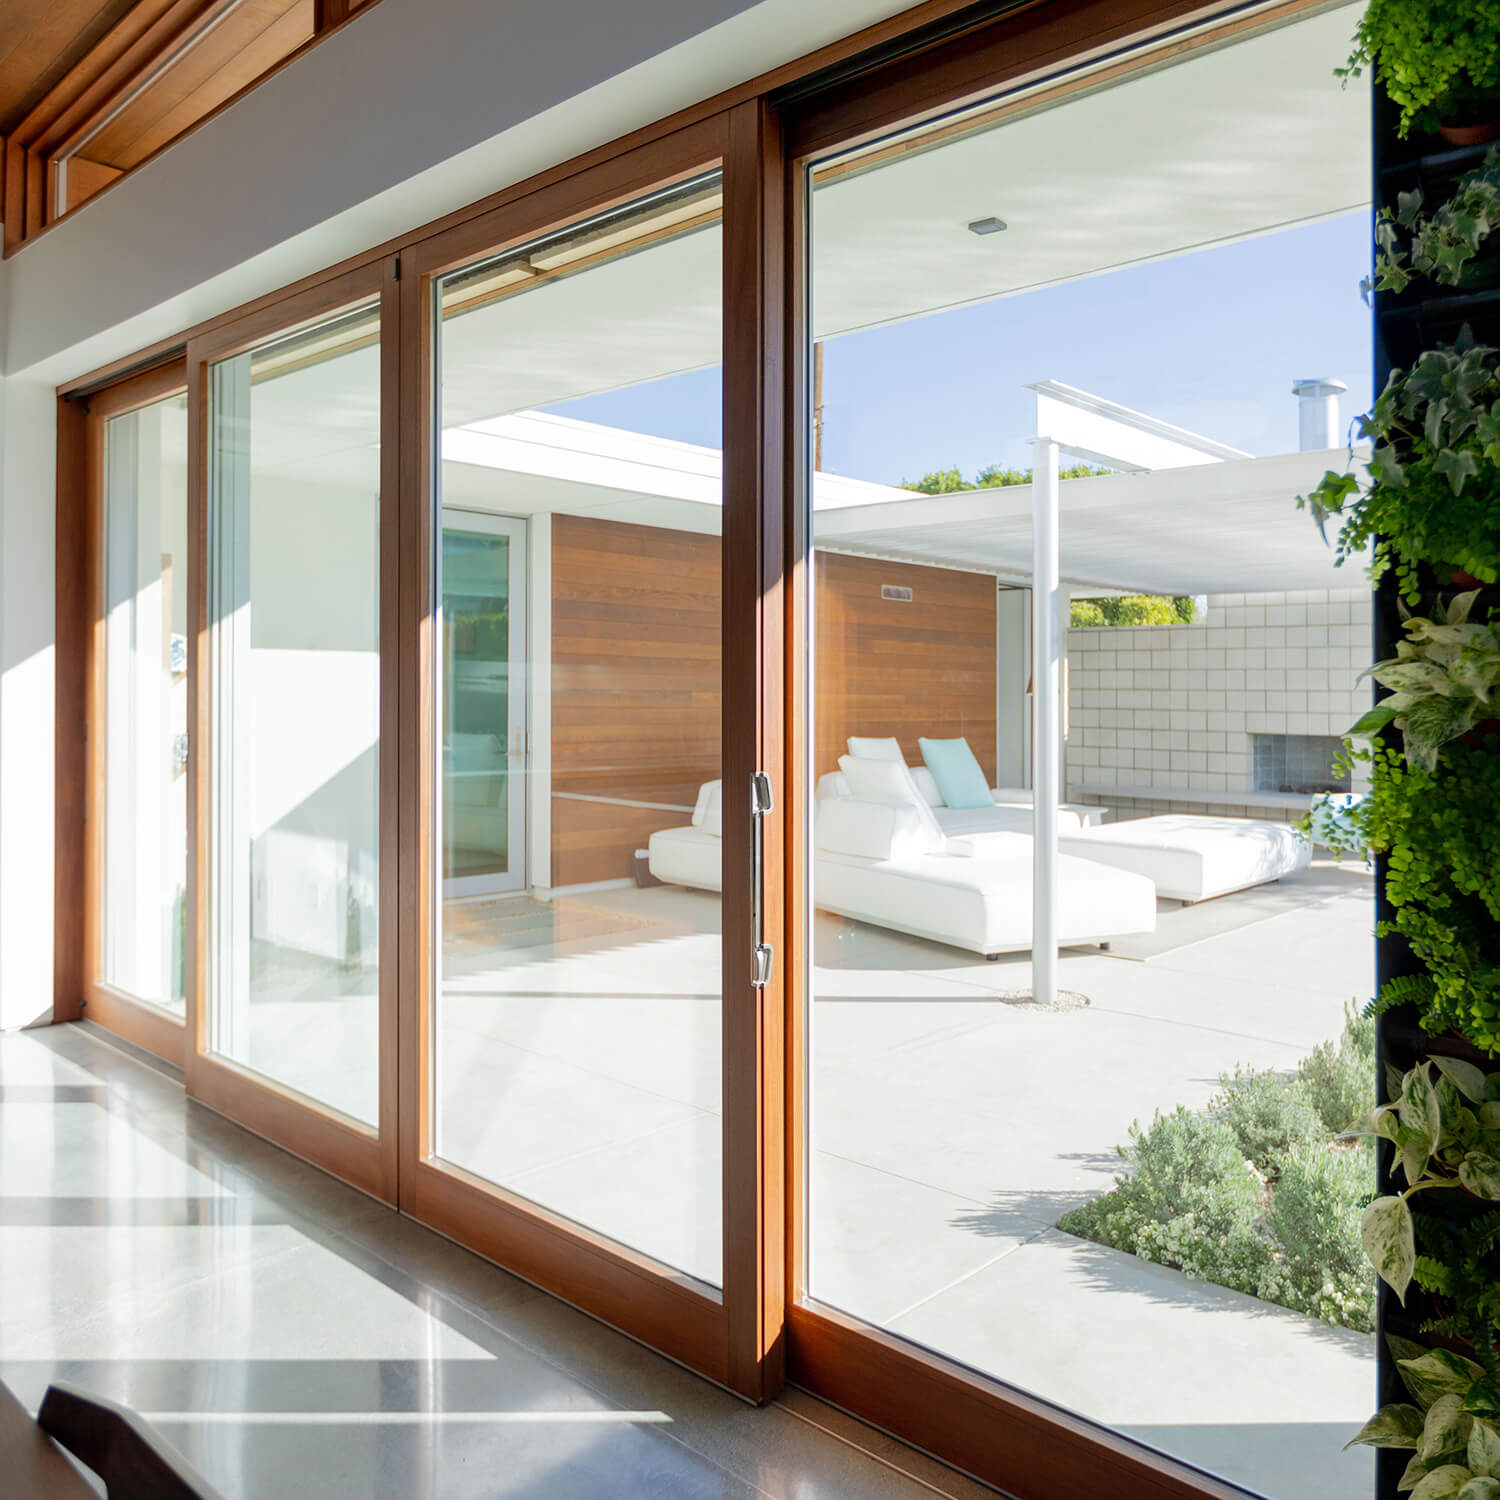 Marvin Ultimate Lift and Slide Doors in the Axiom Desert House by Turkel Design.